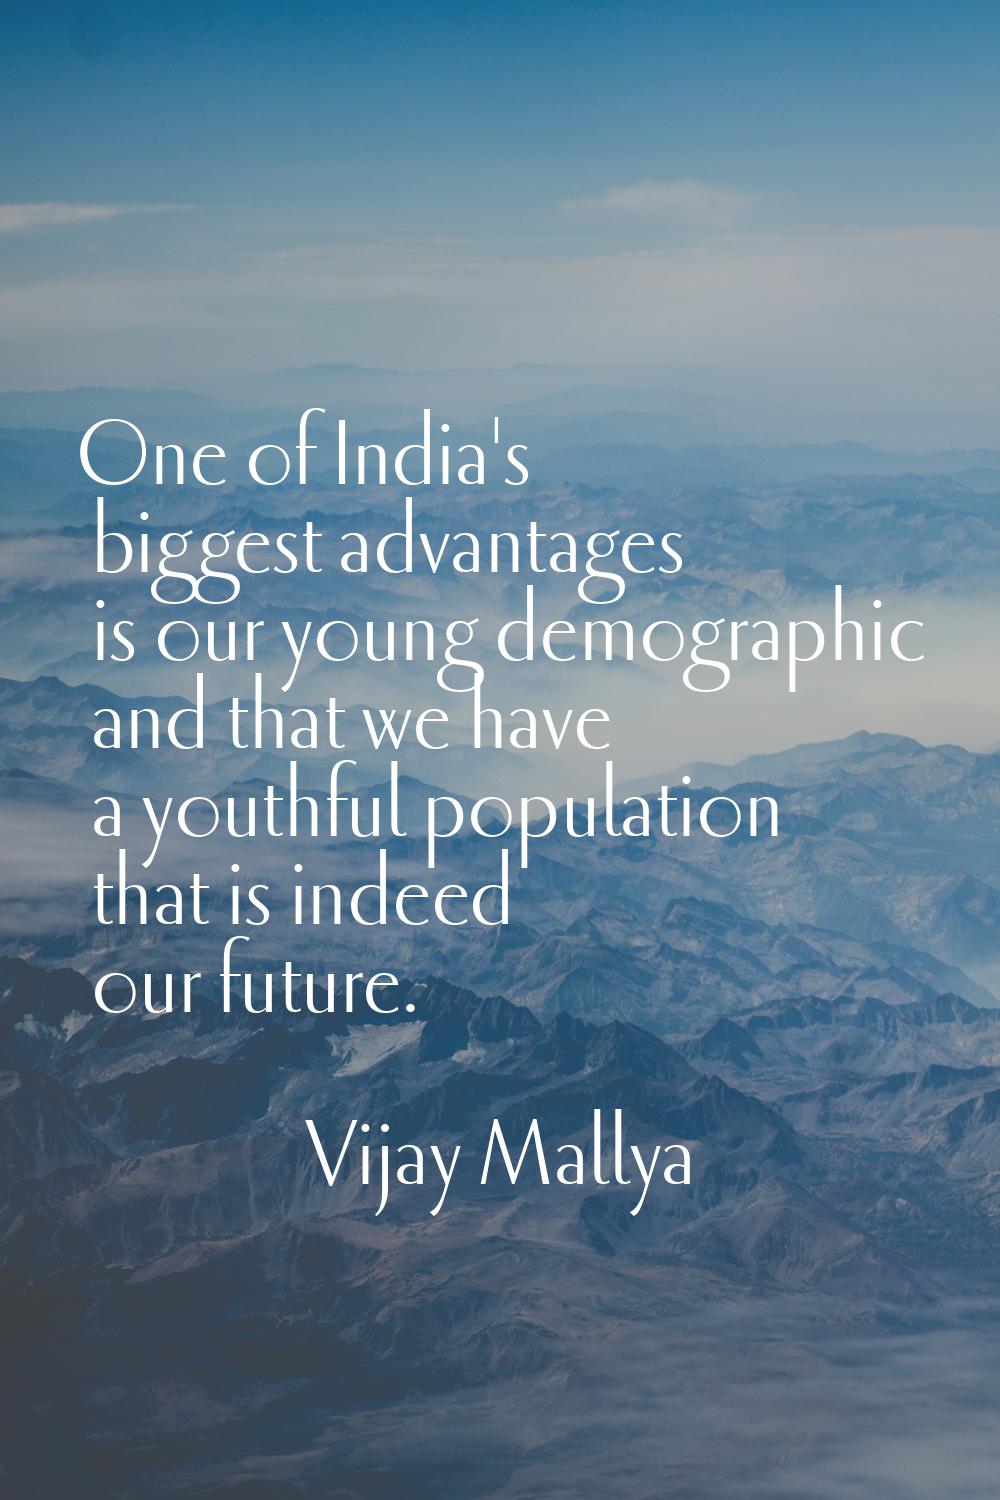 One of India's biggest advantages is our young demographic and that we have a youthful population t